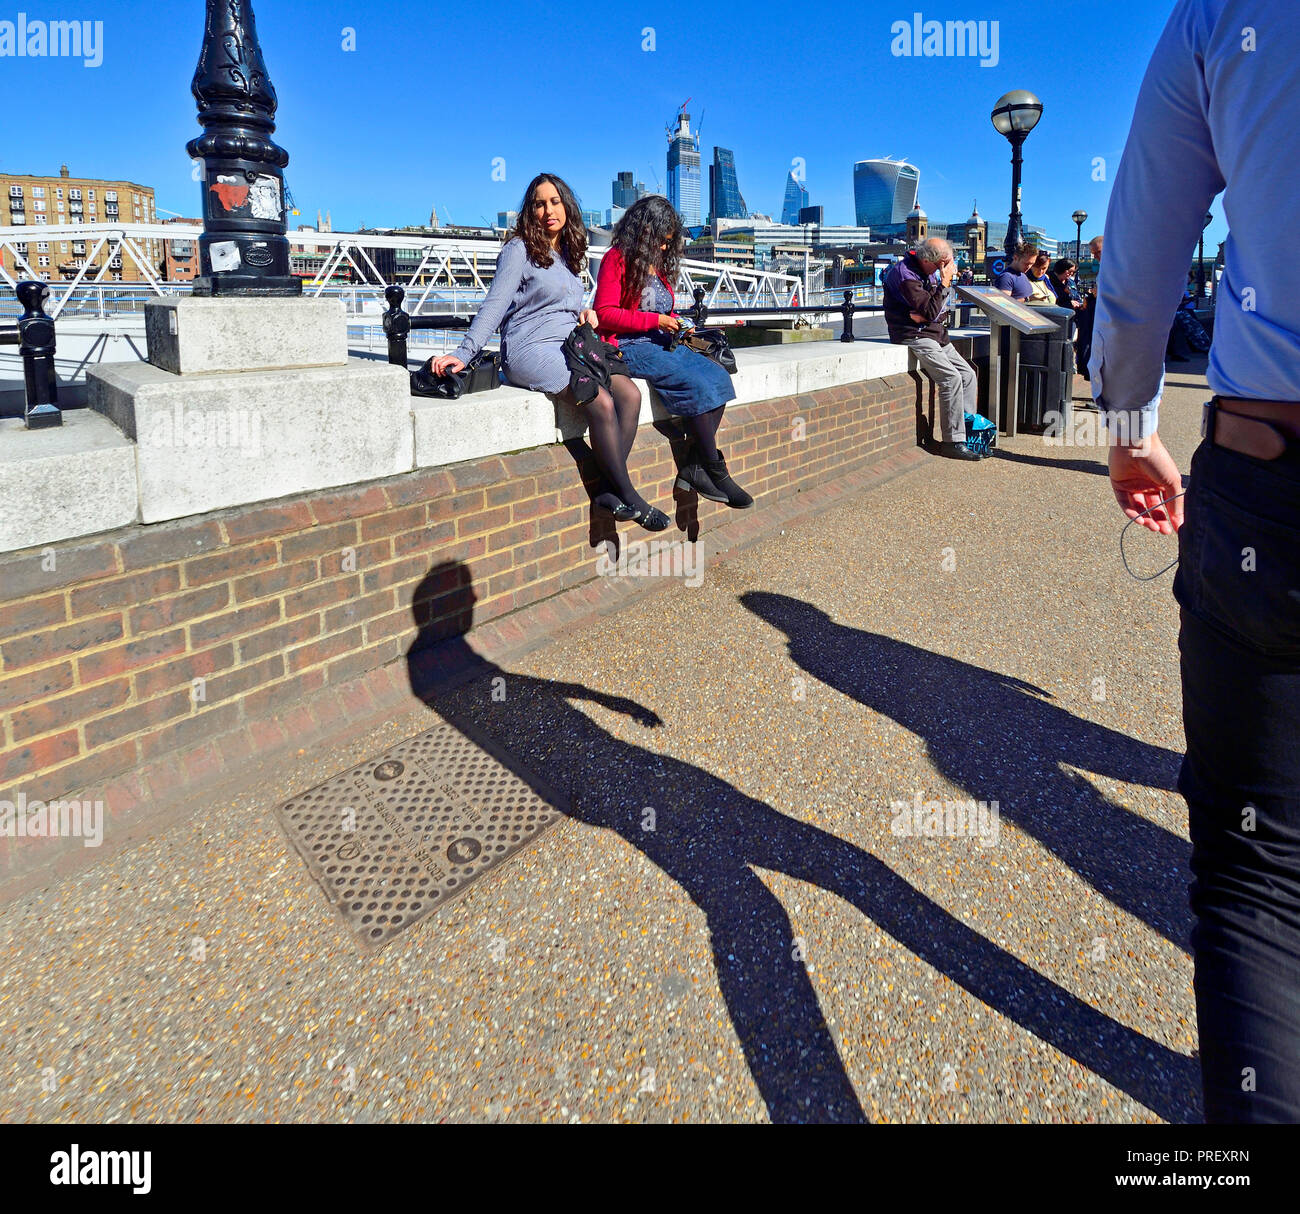 People sitting on the wall on the South Bank, London, England, UK. Lunchtime. City of London skyline behind Stock Photo